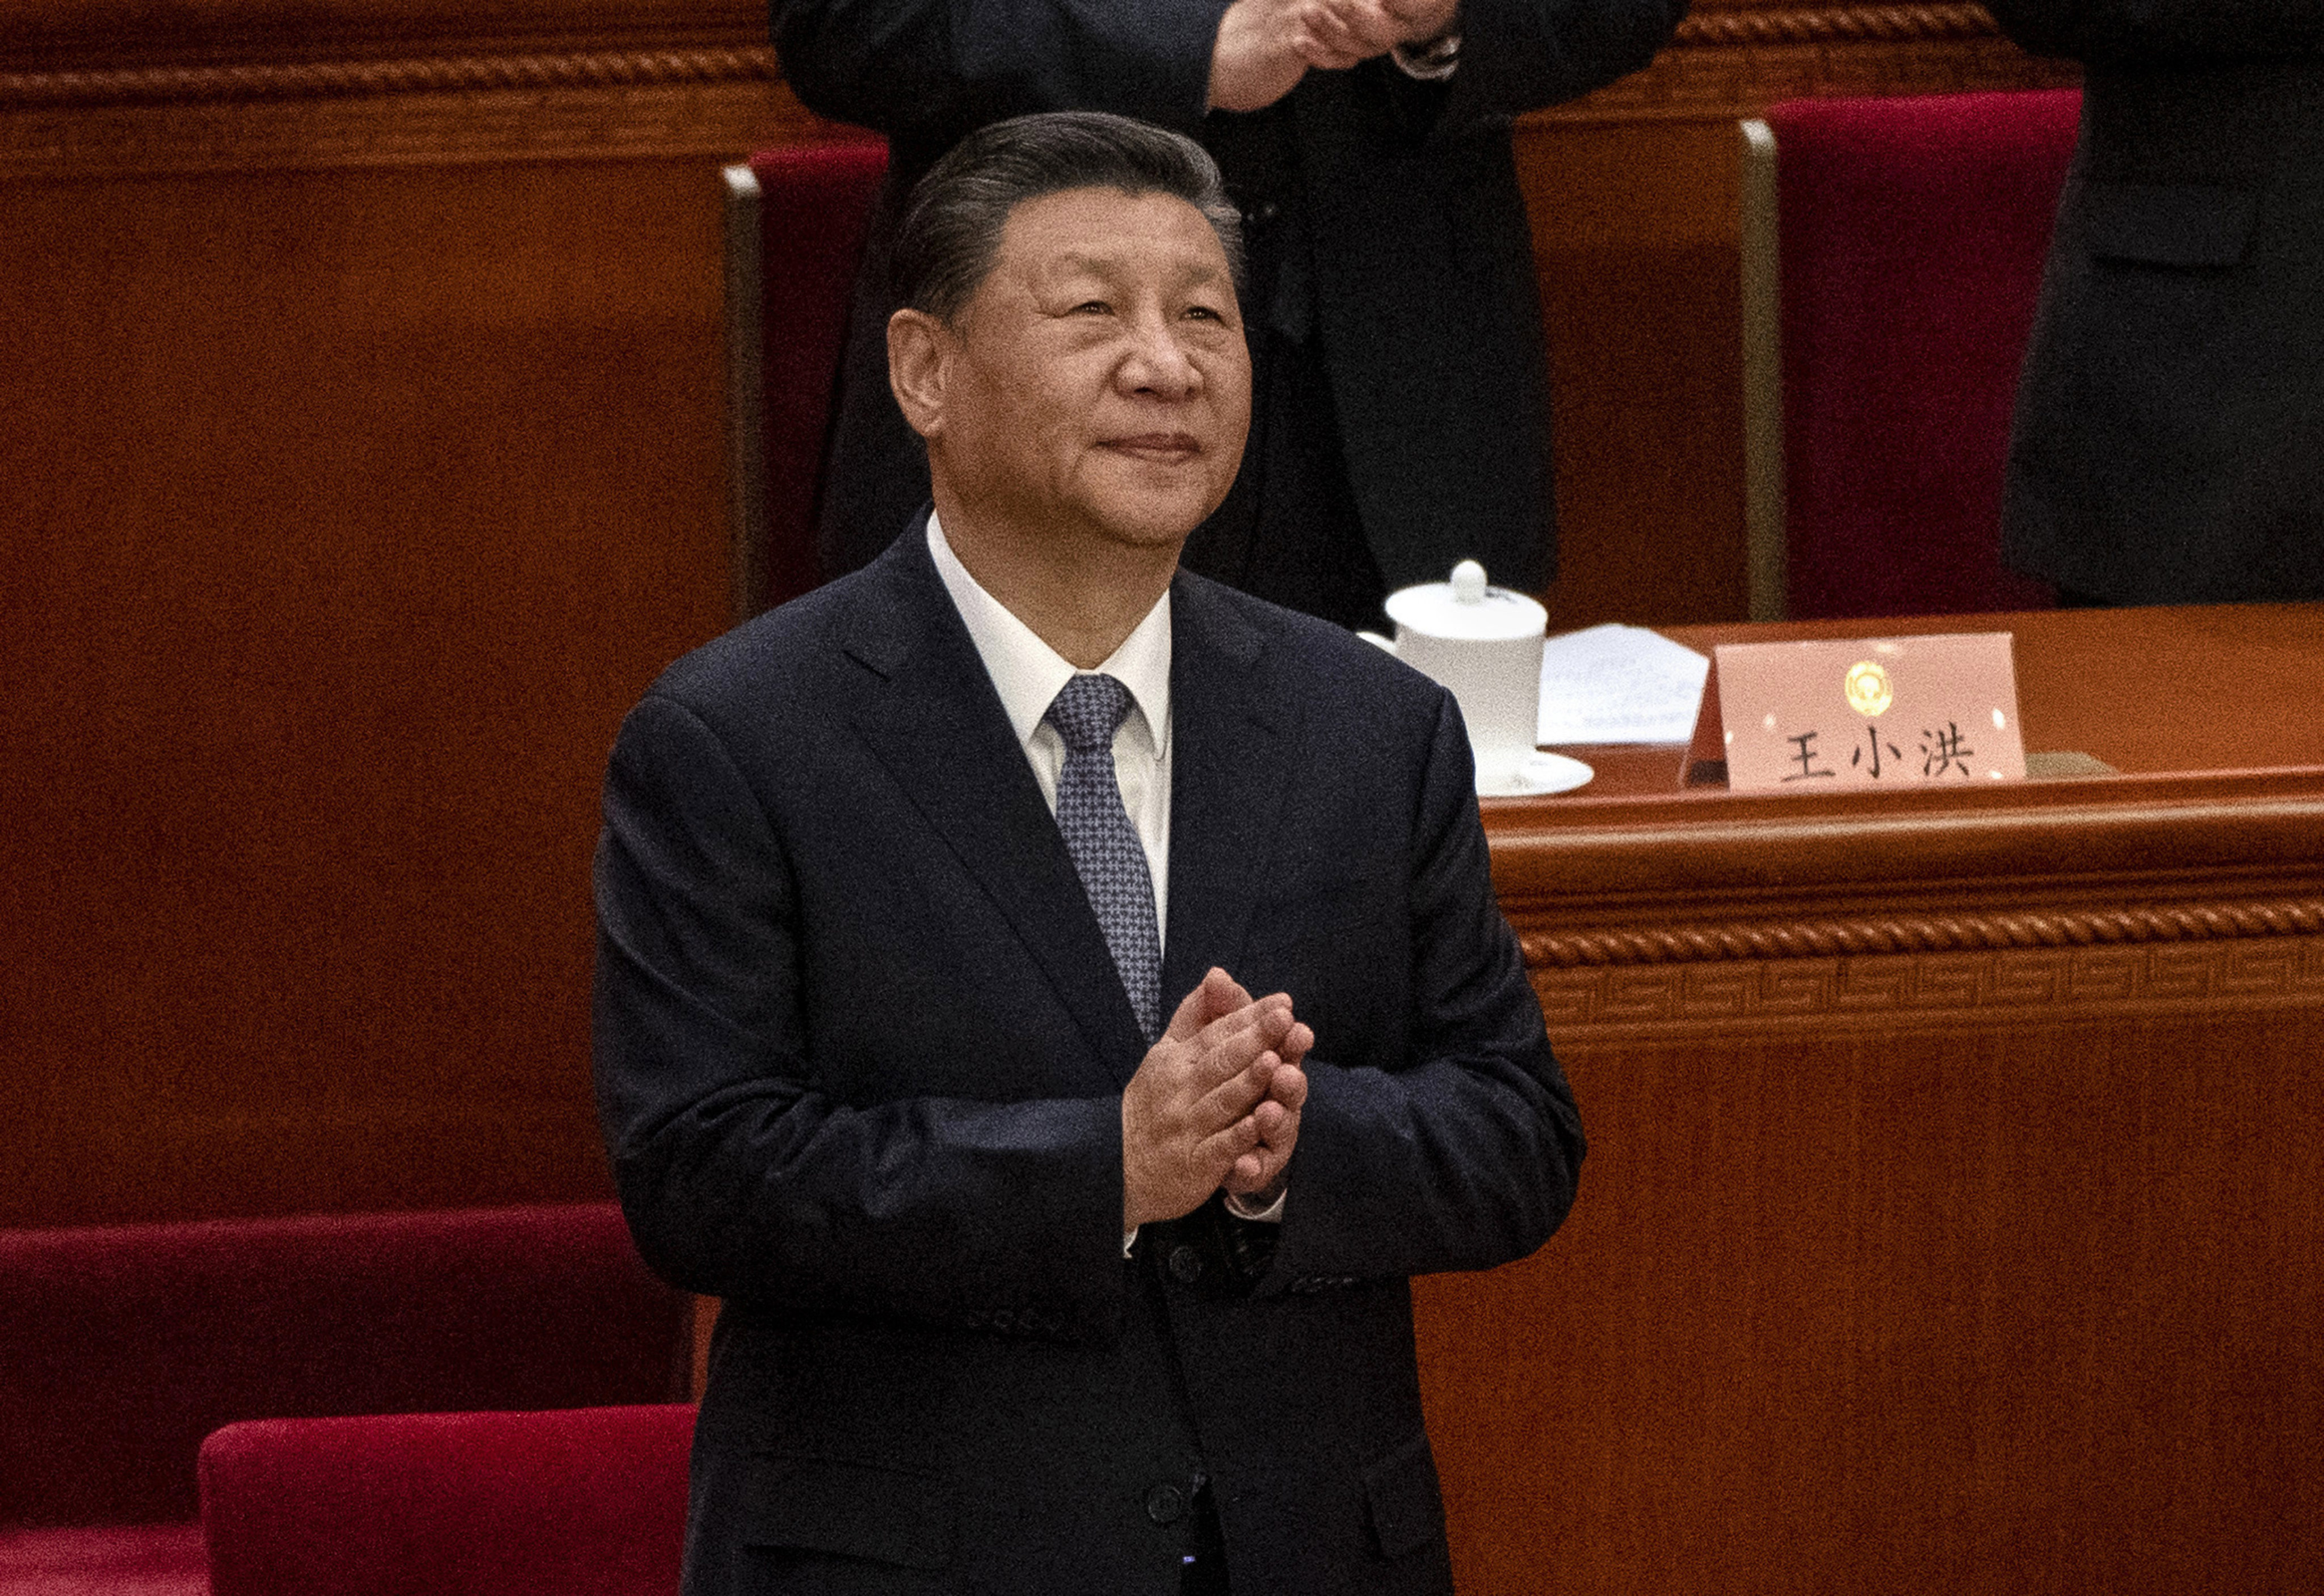 President Xi Jinping asked for “pragmatic” advice from the country’s top scientists on reforming the system. Photo: Getty Images/TNS